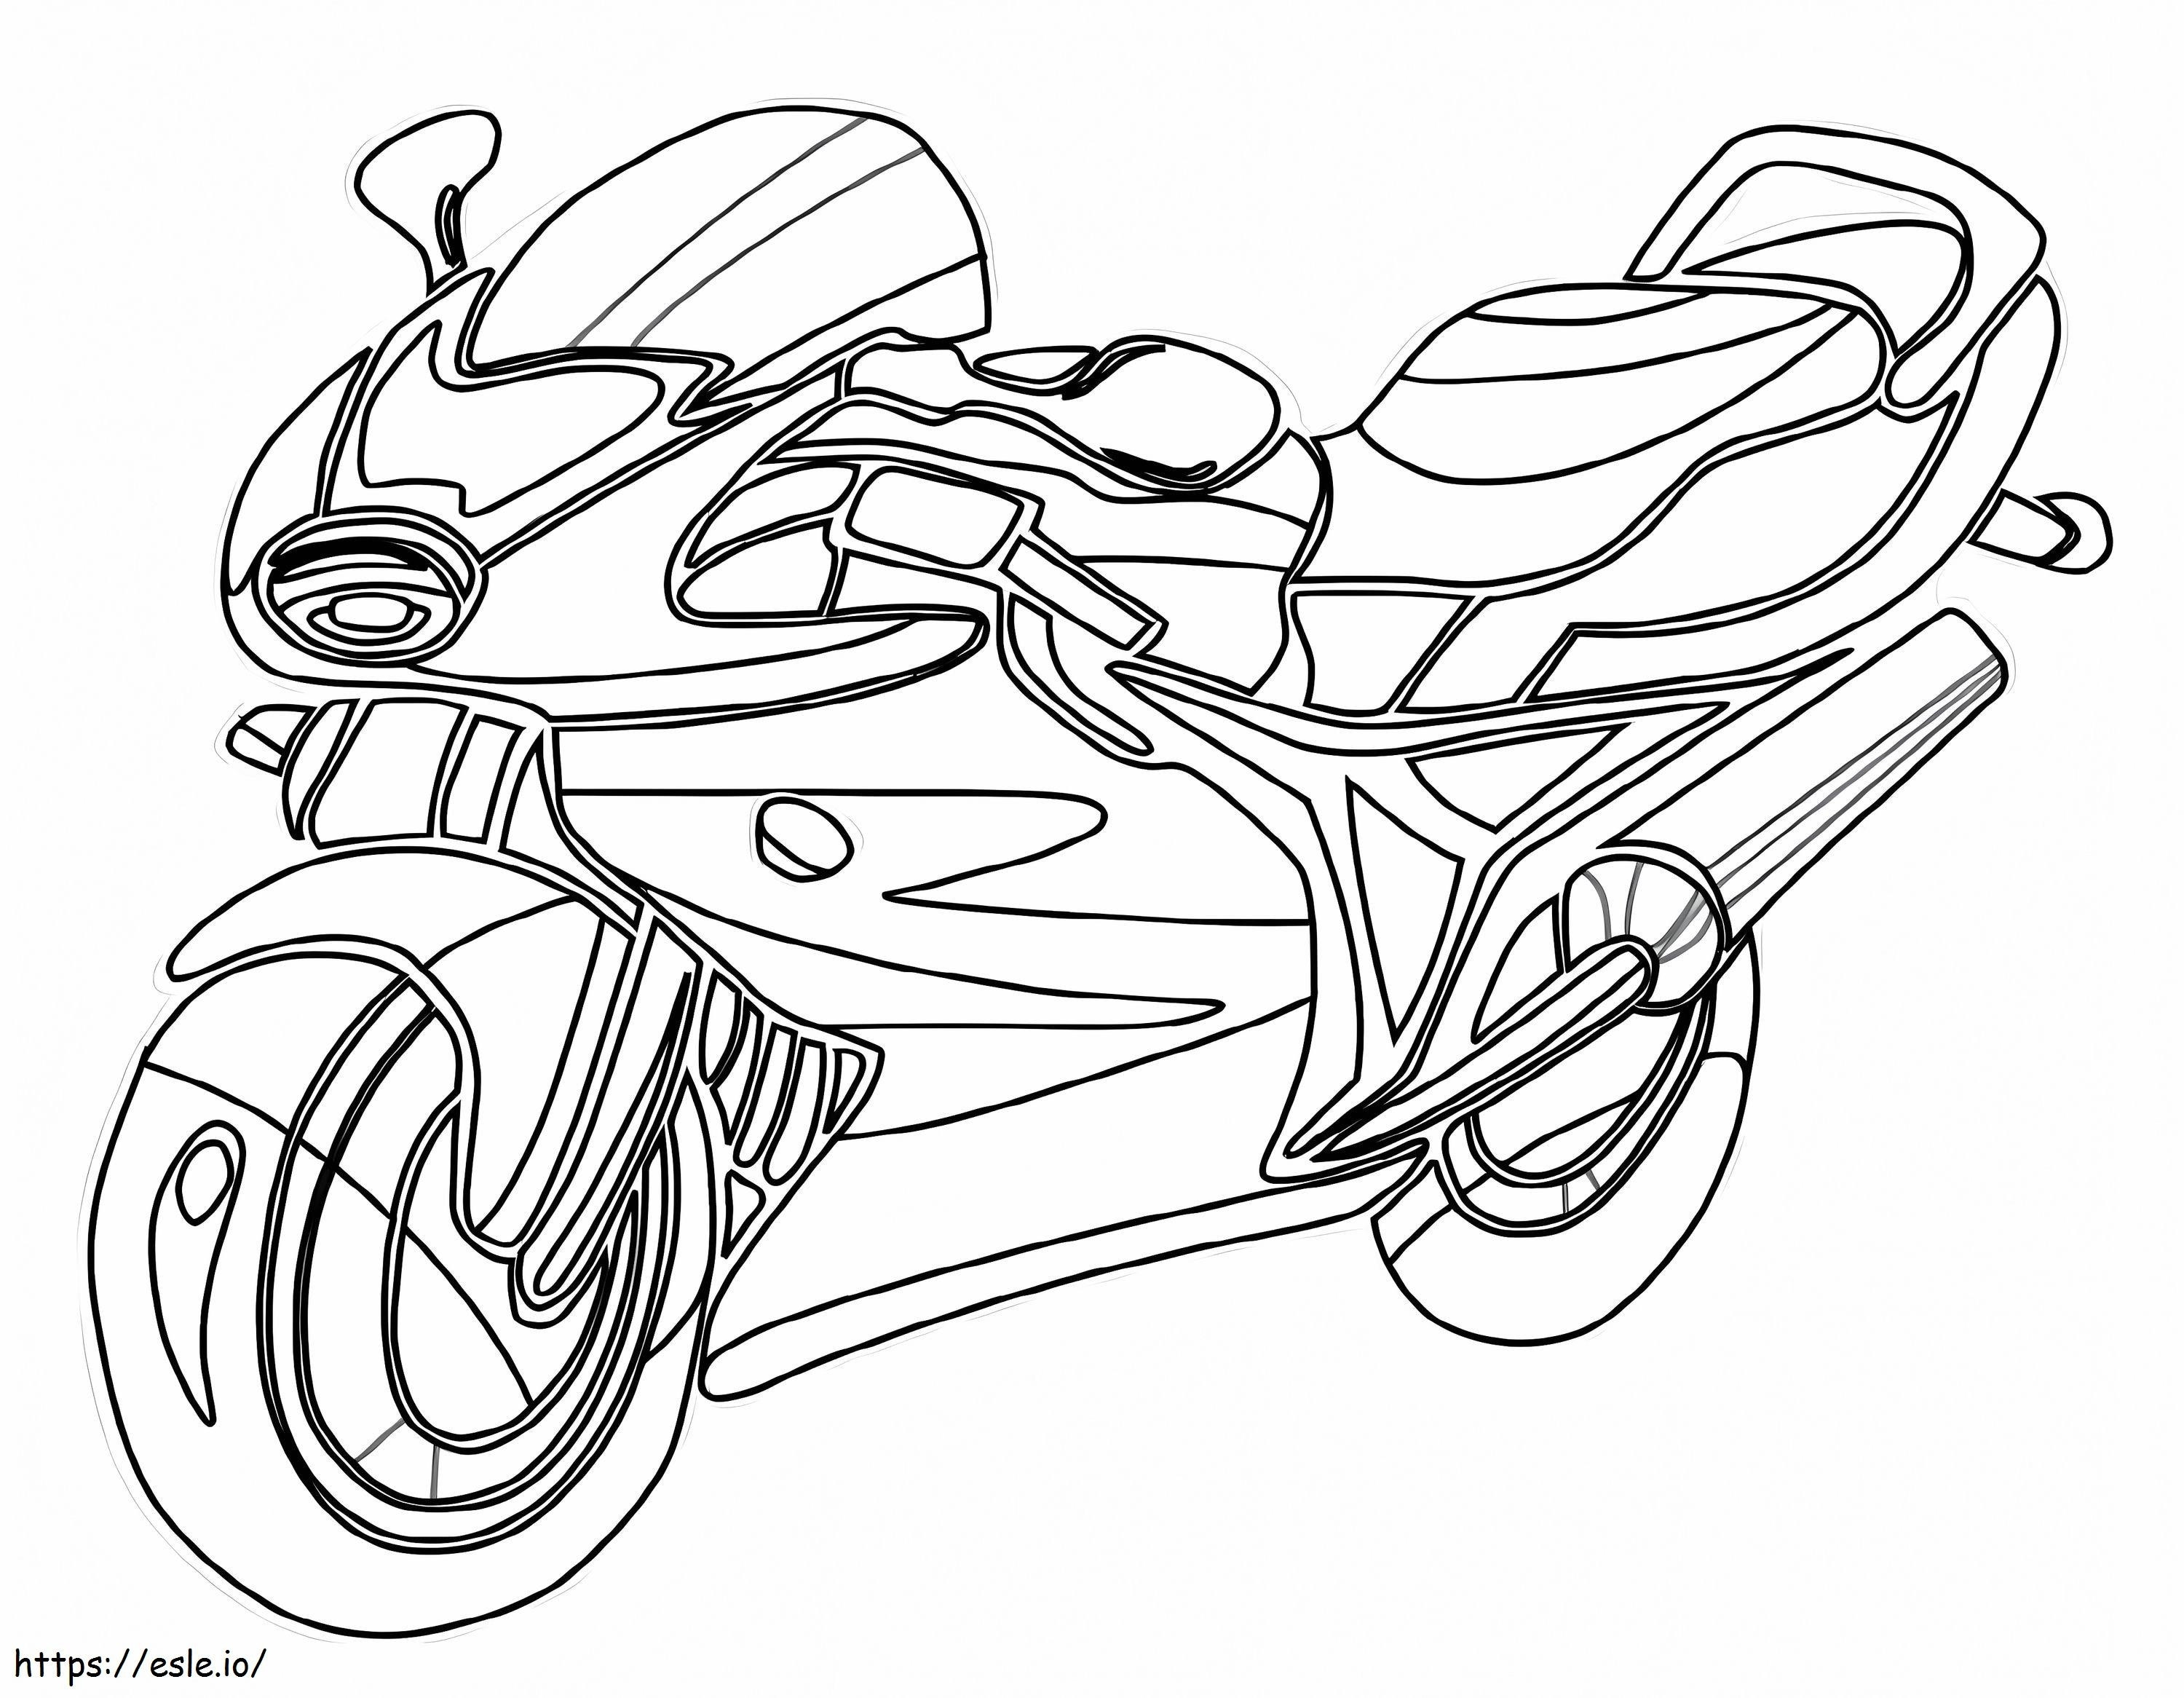 Motorcycle 1 coloring page